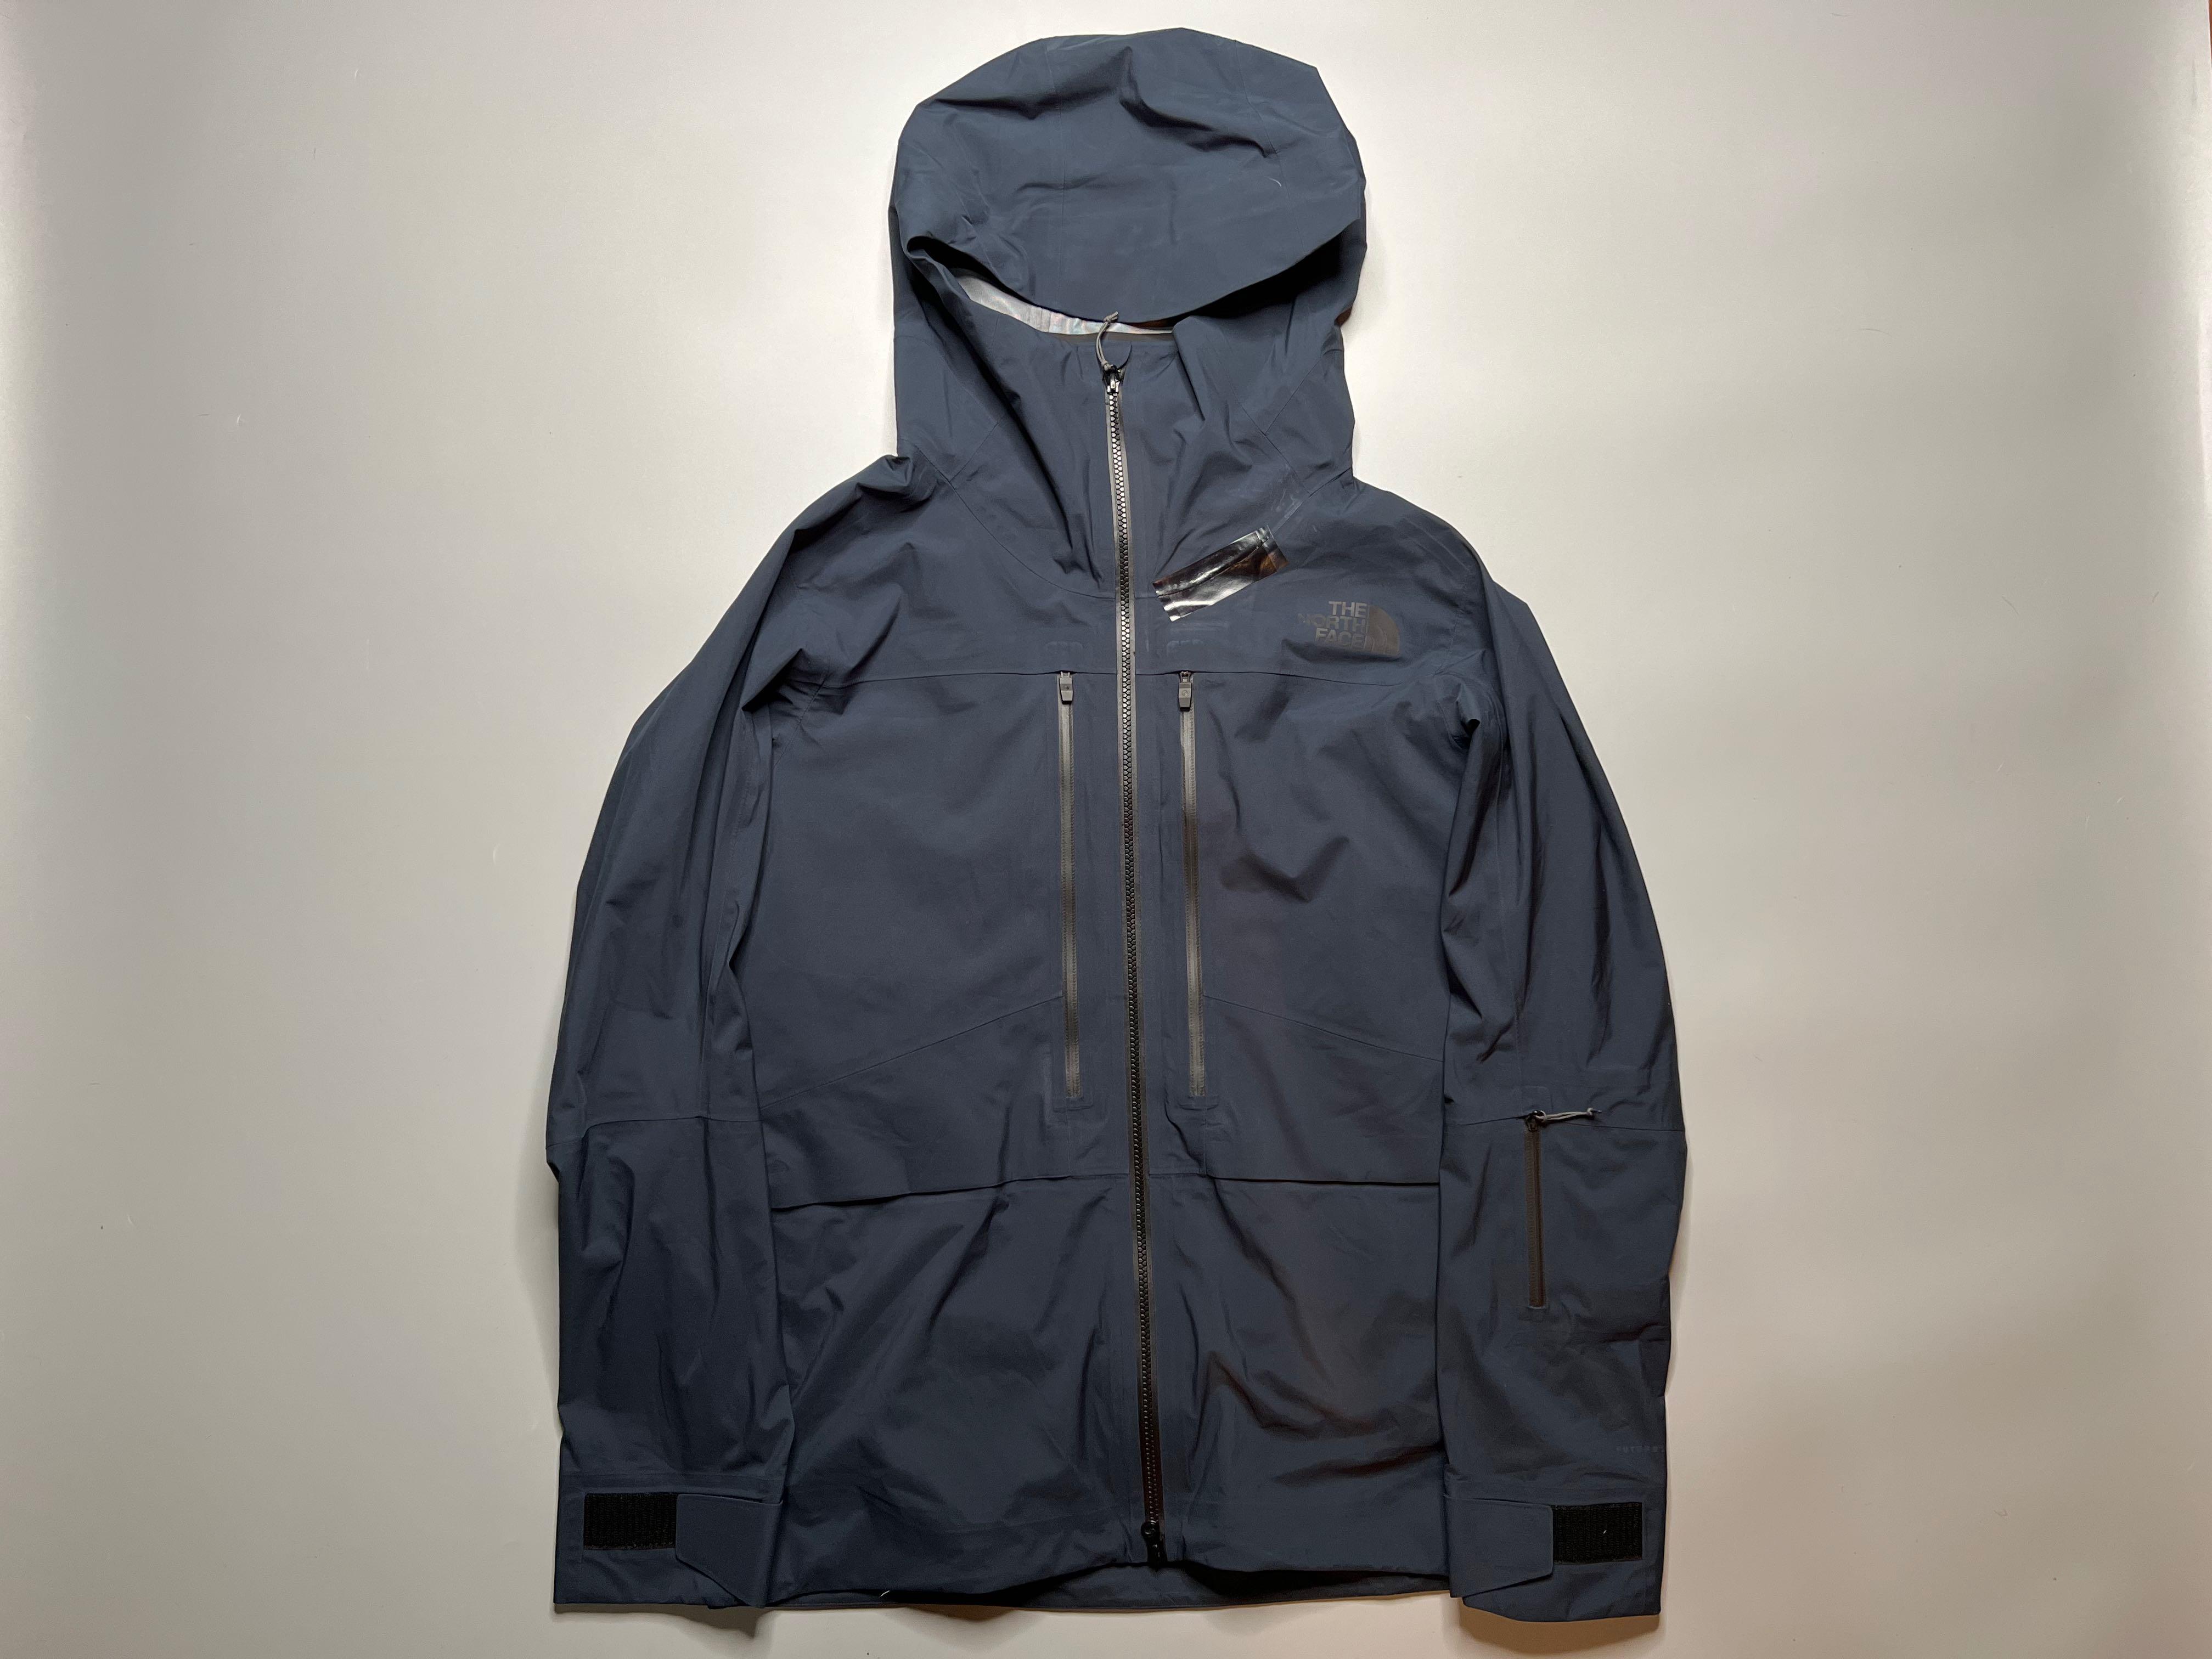 THE NORTH FACE STEEP SERIES・GORE-TEX-